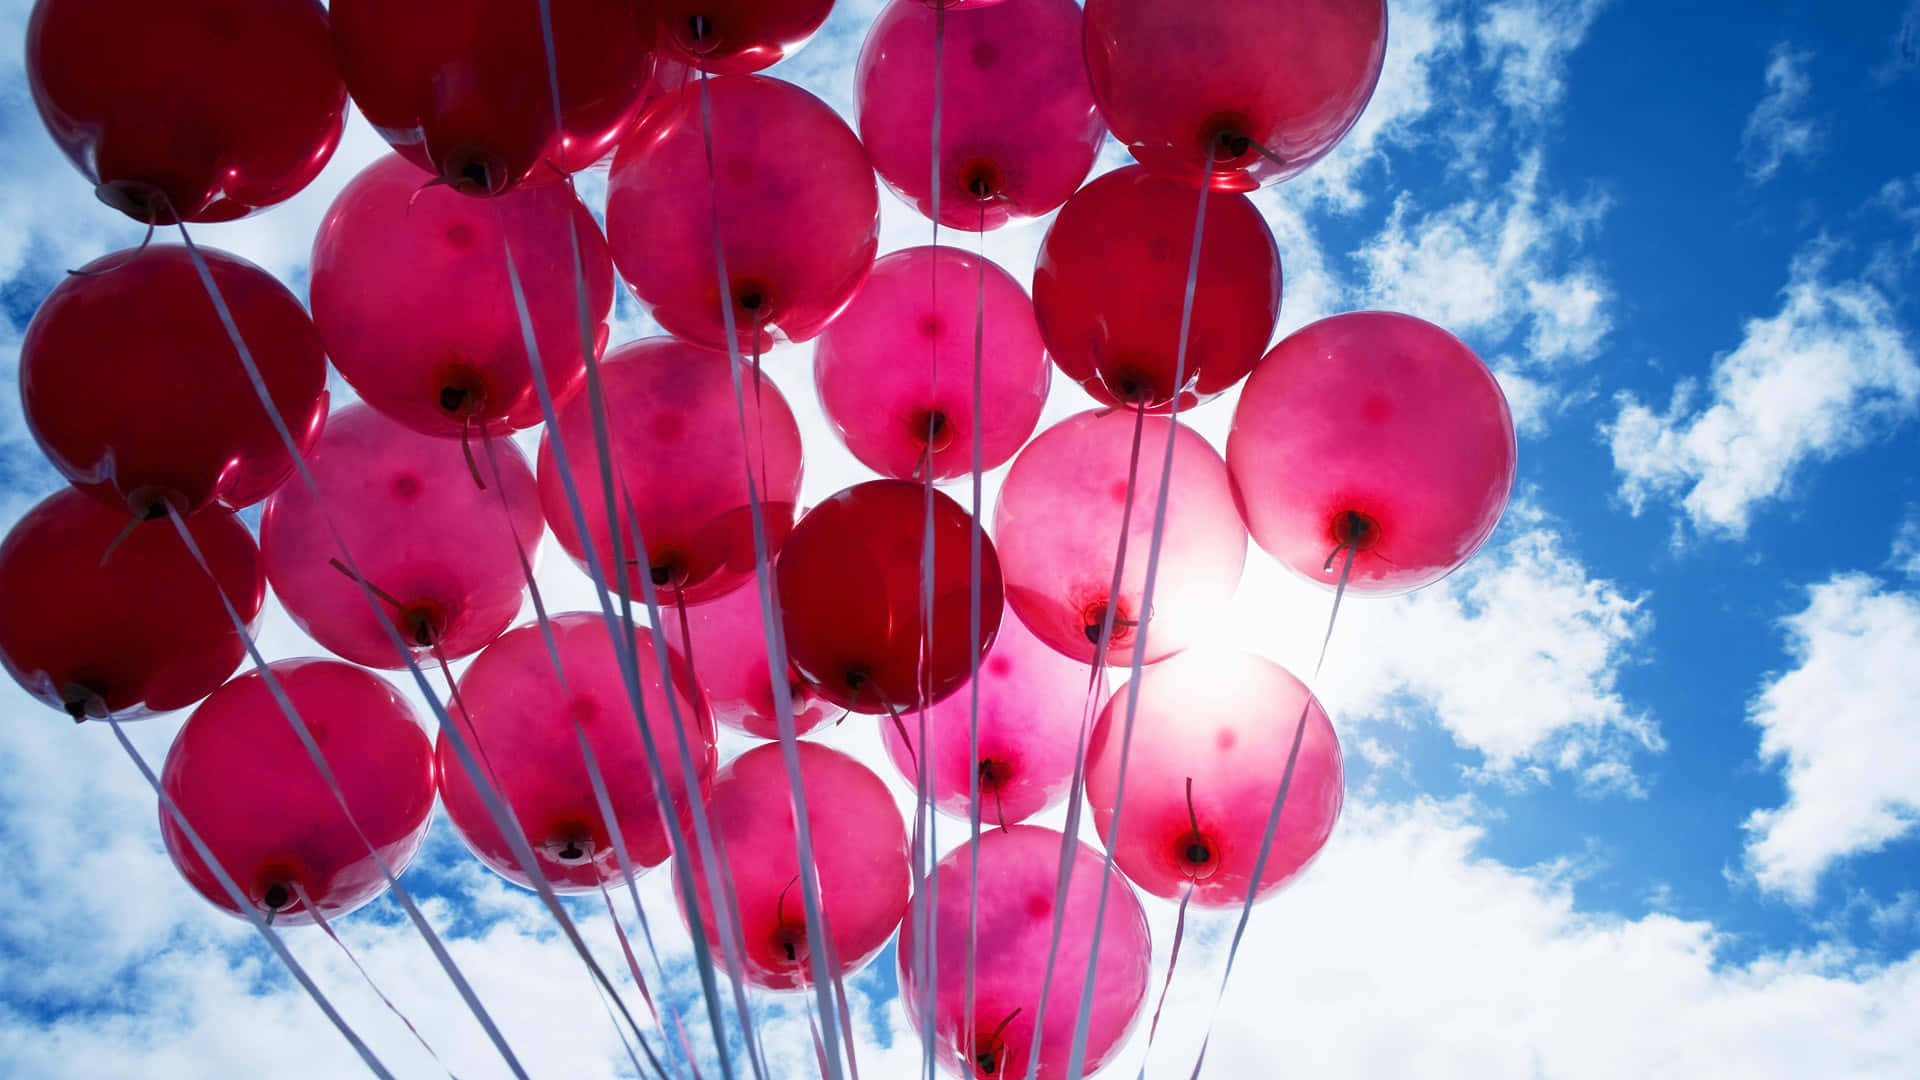 Pink Balloons Picture